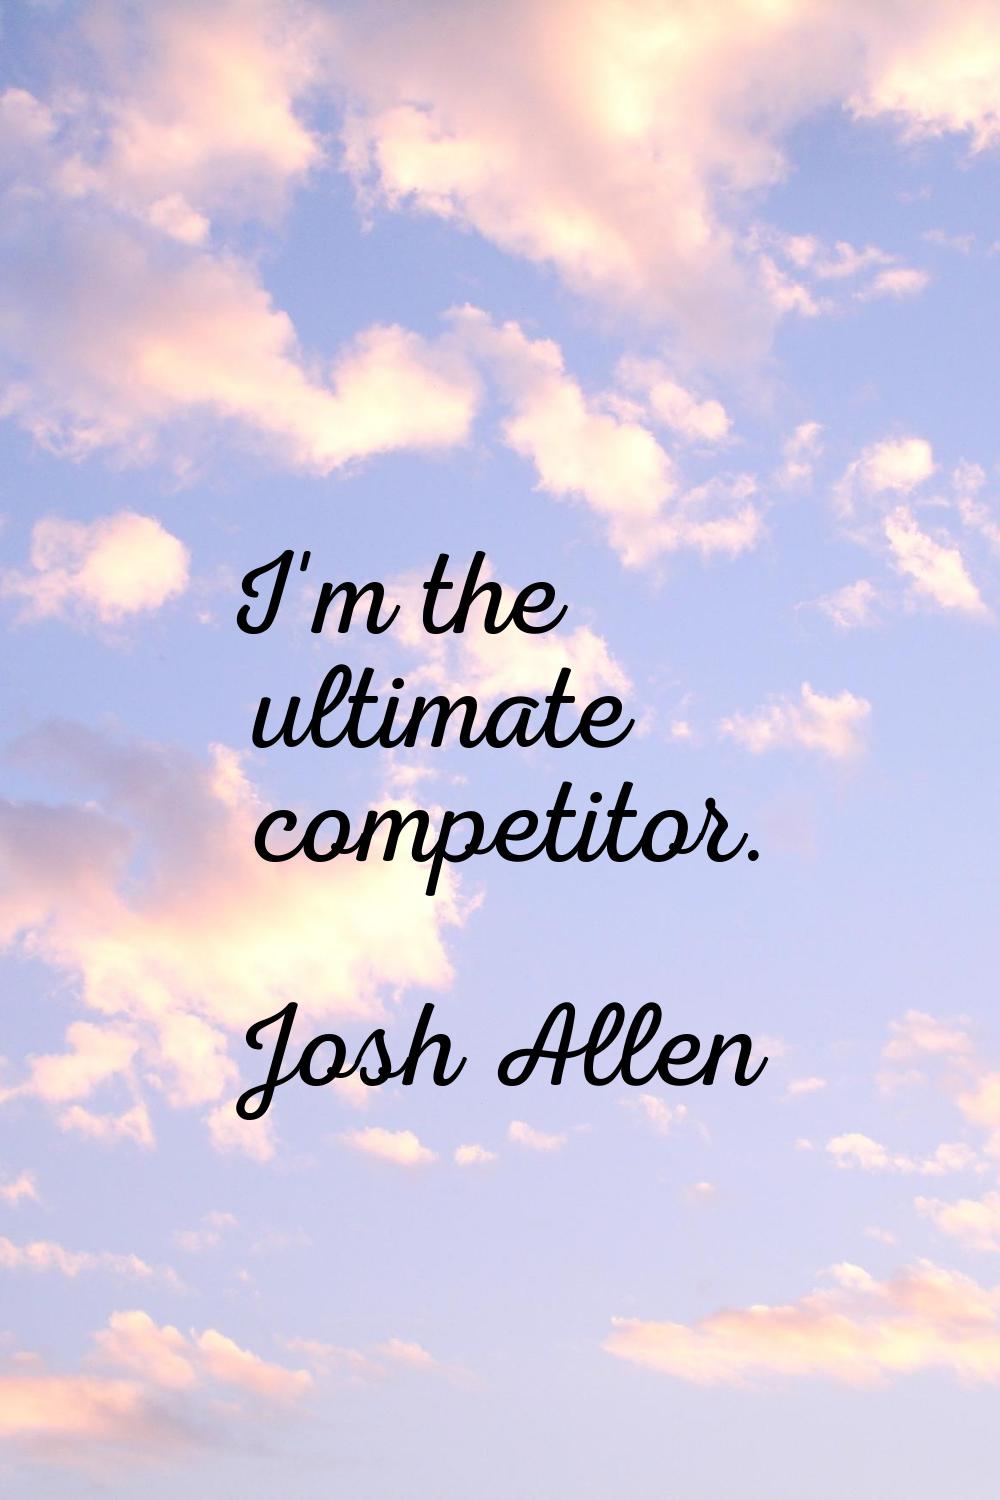 I'm the ultimate competitor.